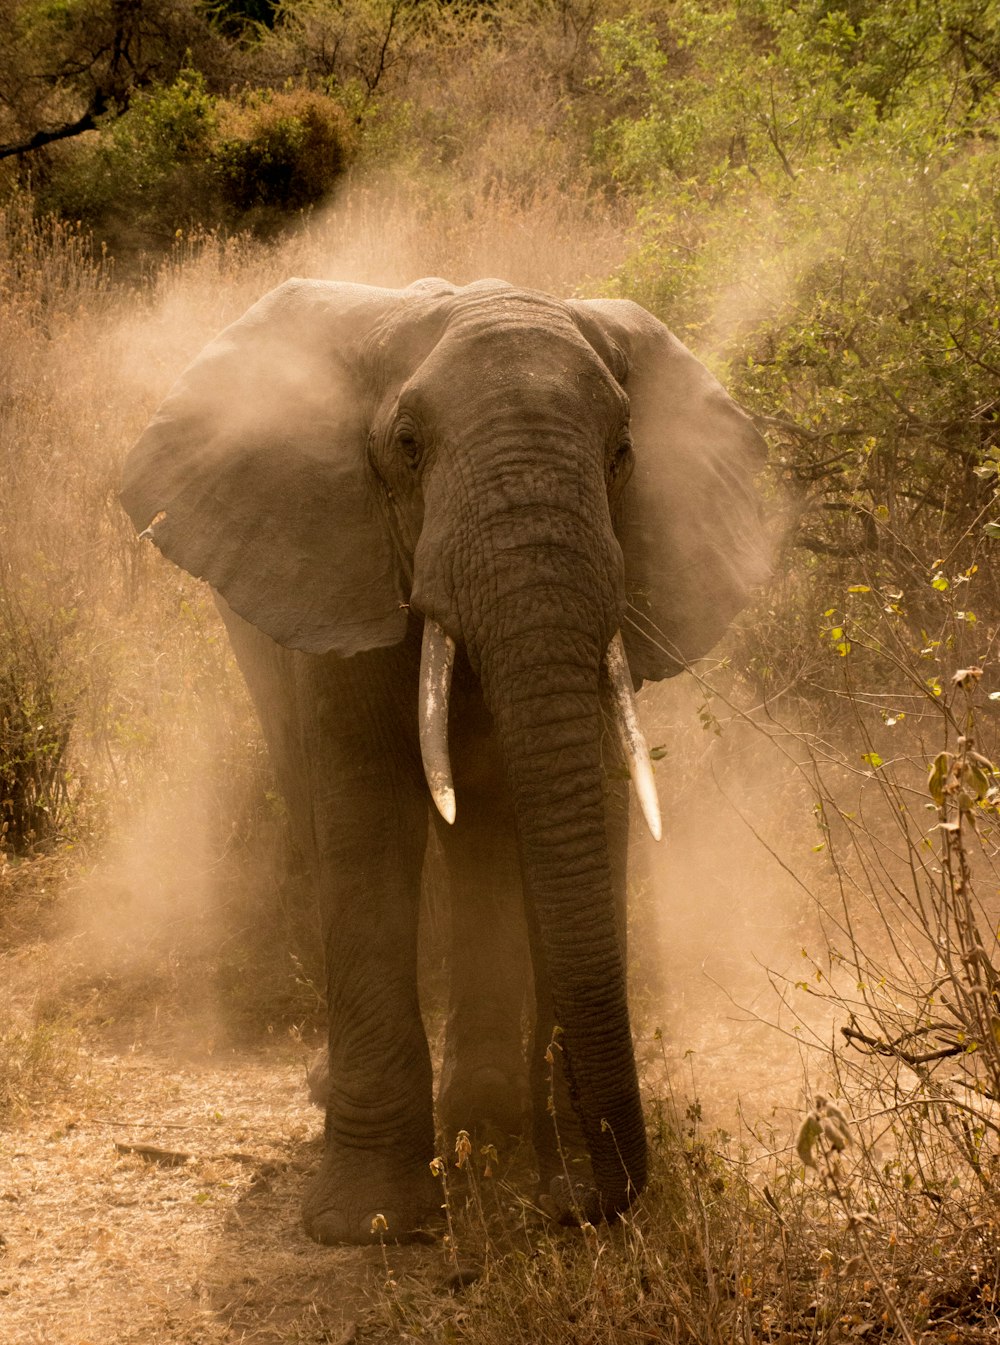 an elephant standing on a dirt road in the wild